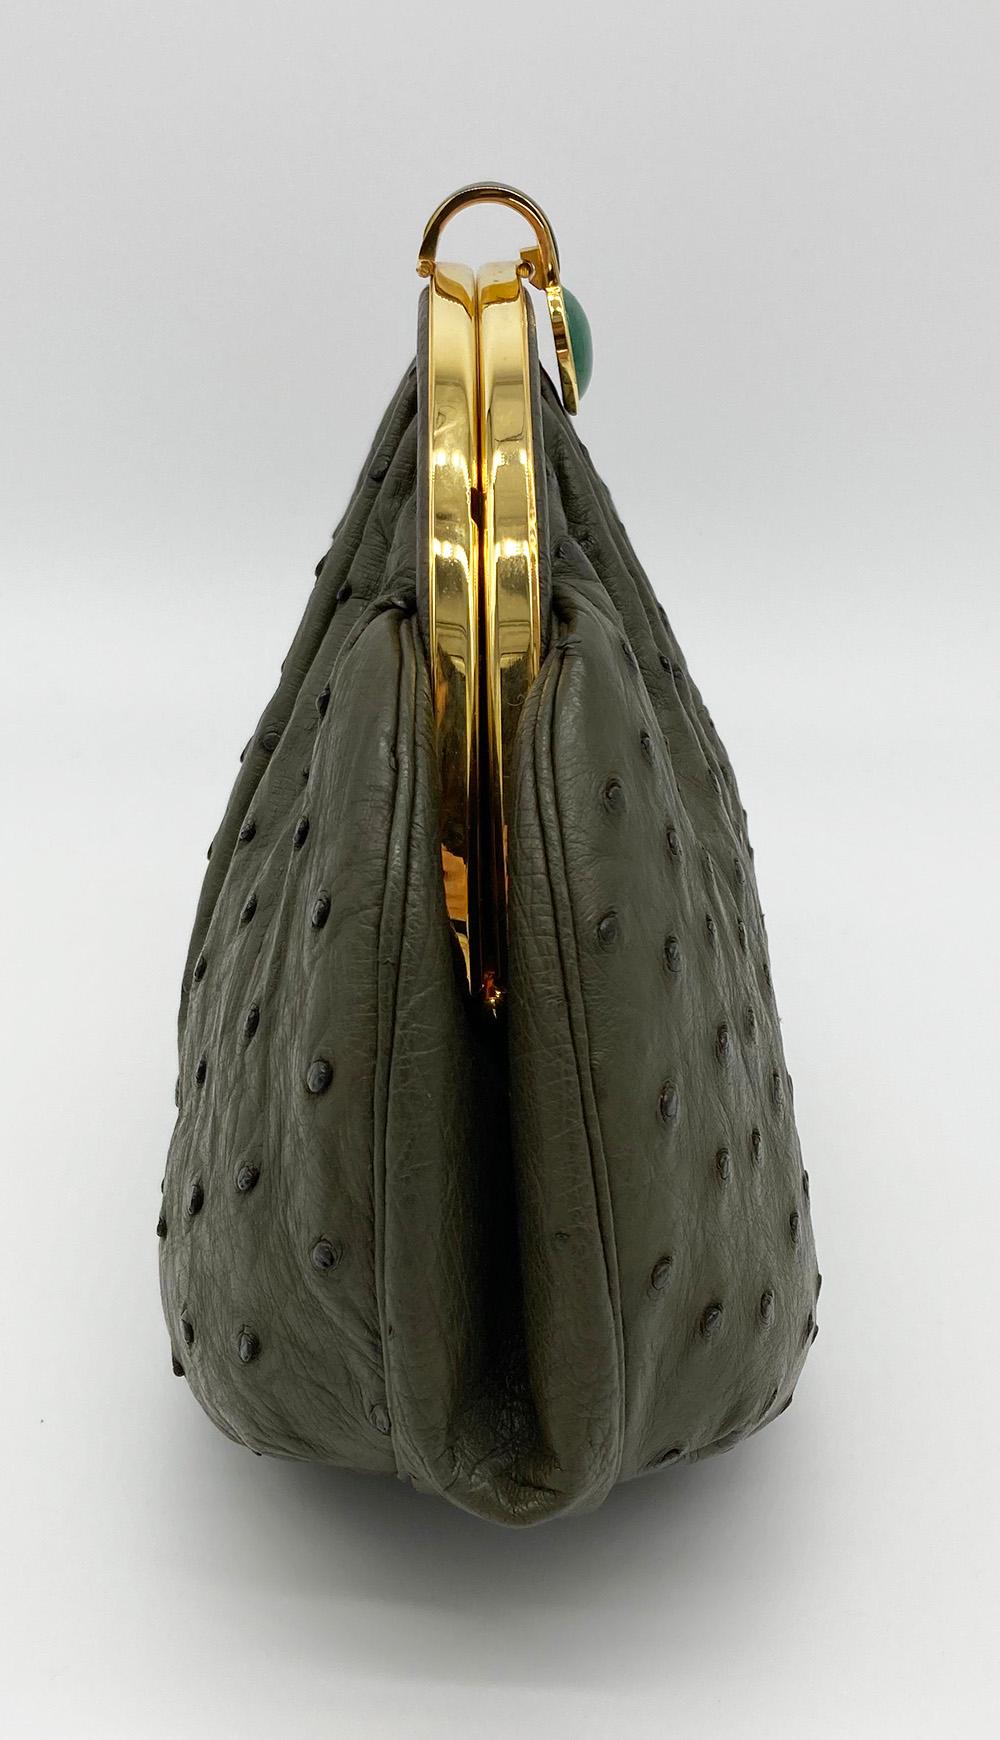 Vintage Judith Leiber Green Ostrich Clutch in excellent condition. Green ostrich leather exterior trimmed with gold hardware and jade stone. Top lift closure opens to a green satin interior with 2 side pockets and attached matching leather shoulder